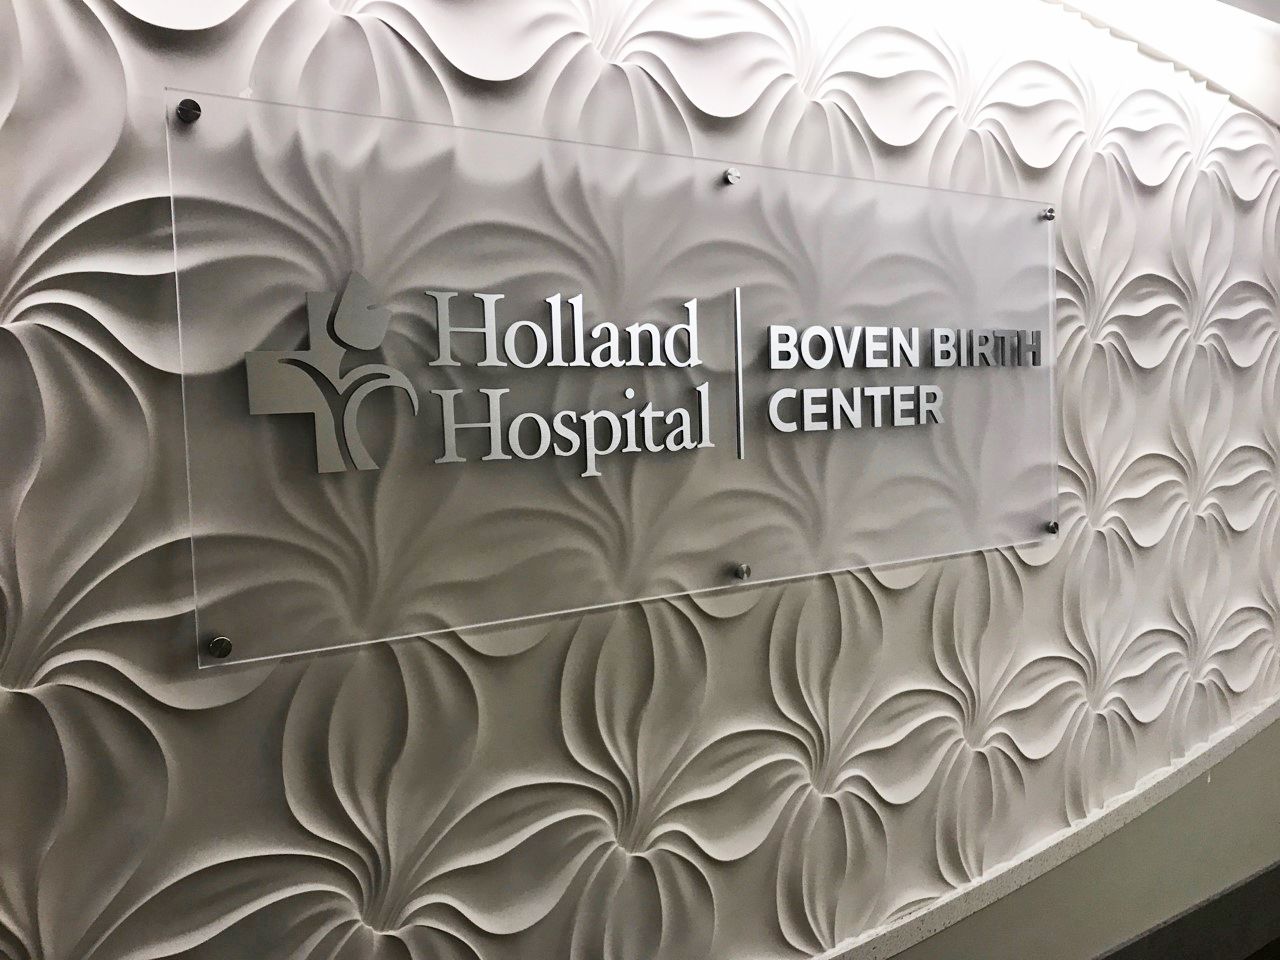 Frosted acrylic sign for hospital birthing center